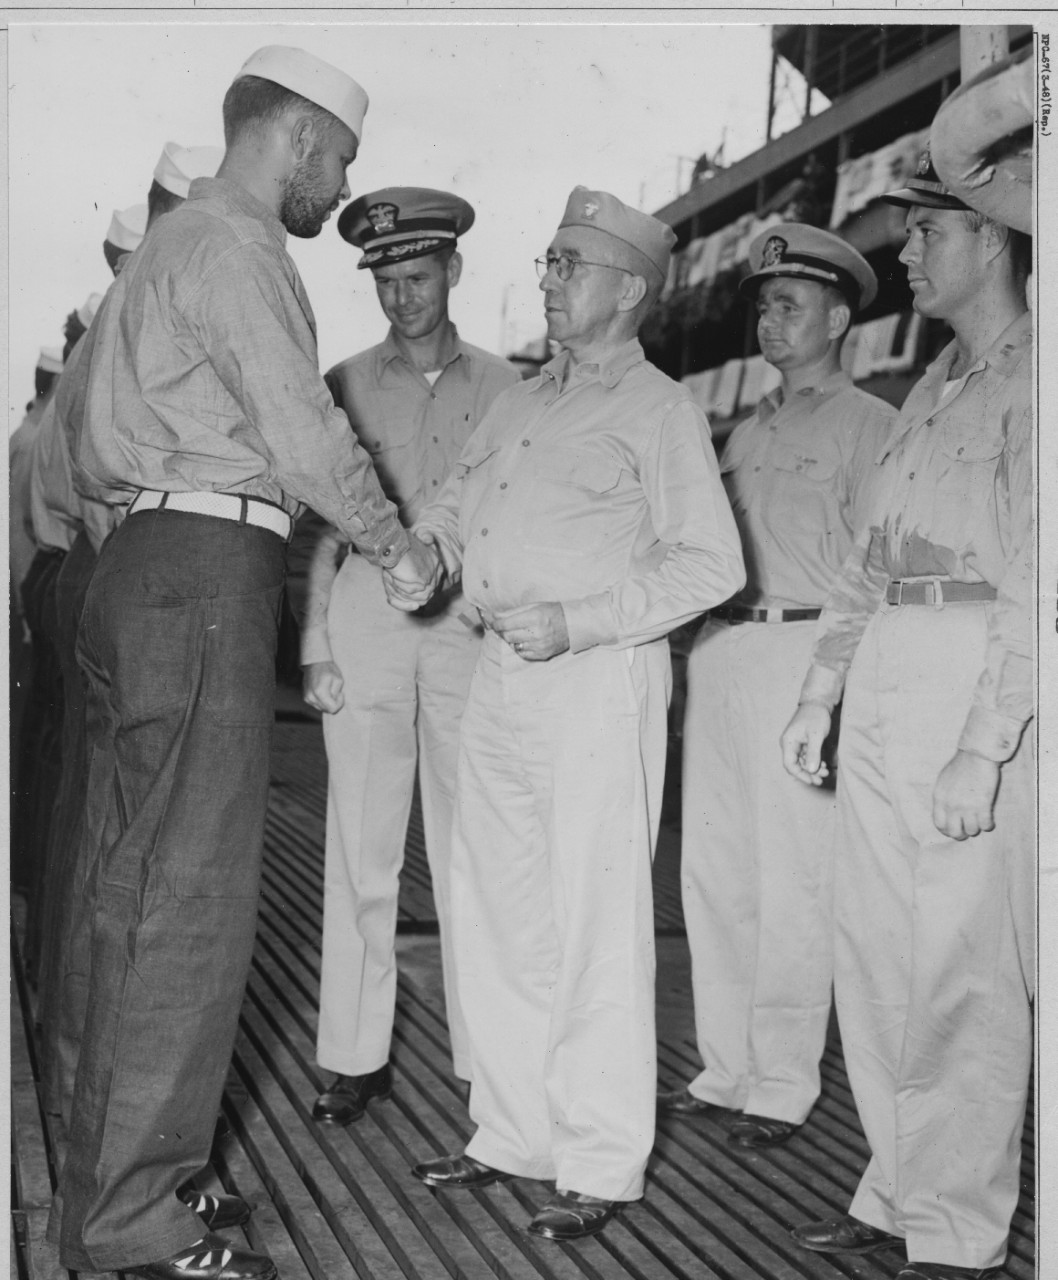 While Cmdr. John F. Davidson looks on approvingly, Rear Adm. Fife exchanges pleasantries with a bearded member of Blackfish’s crew on the occasion of the men being awarded their Submarine Combat Insignias, 23 December 1943. Note bedding airing on...